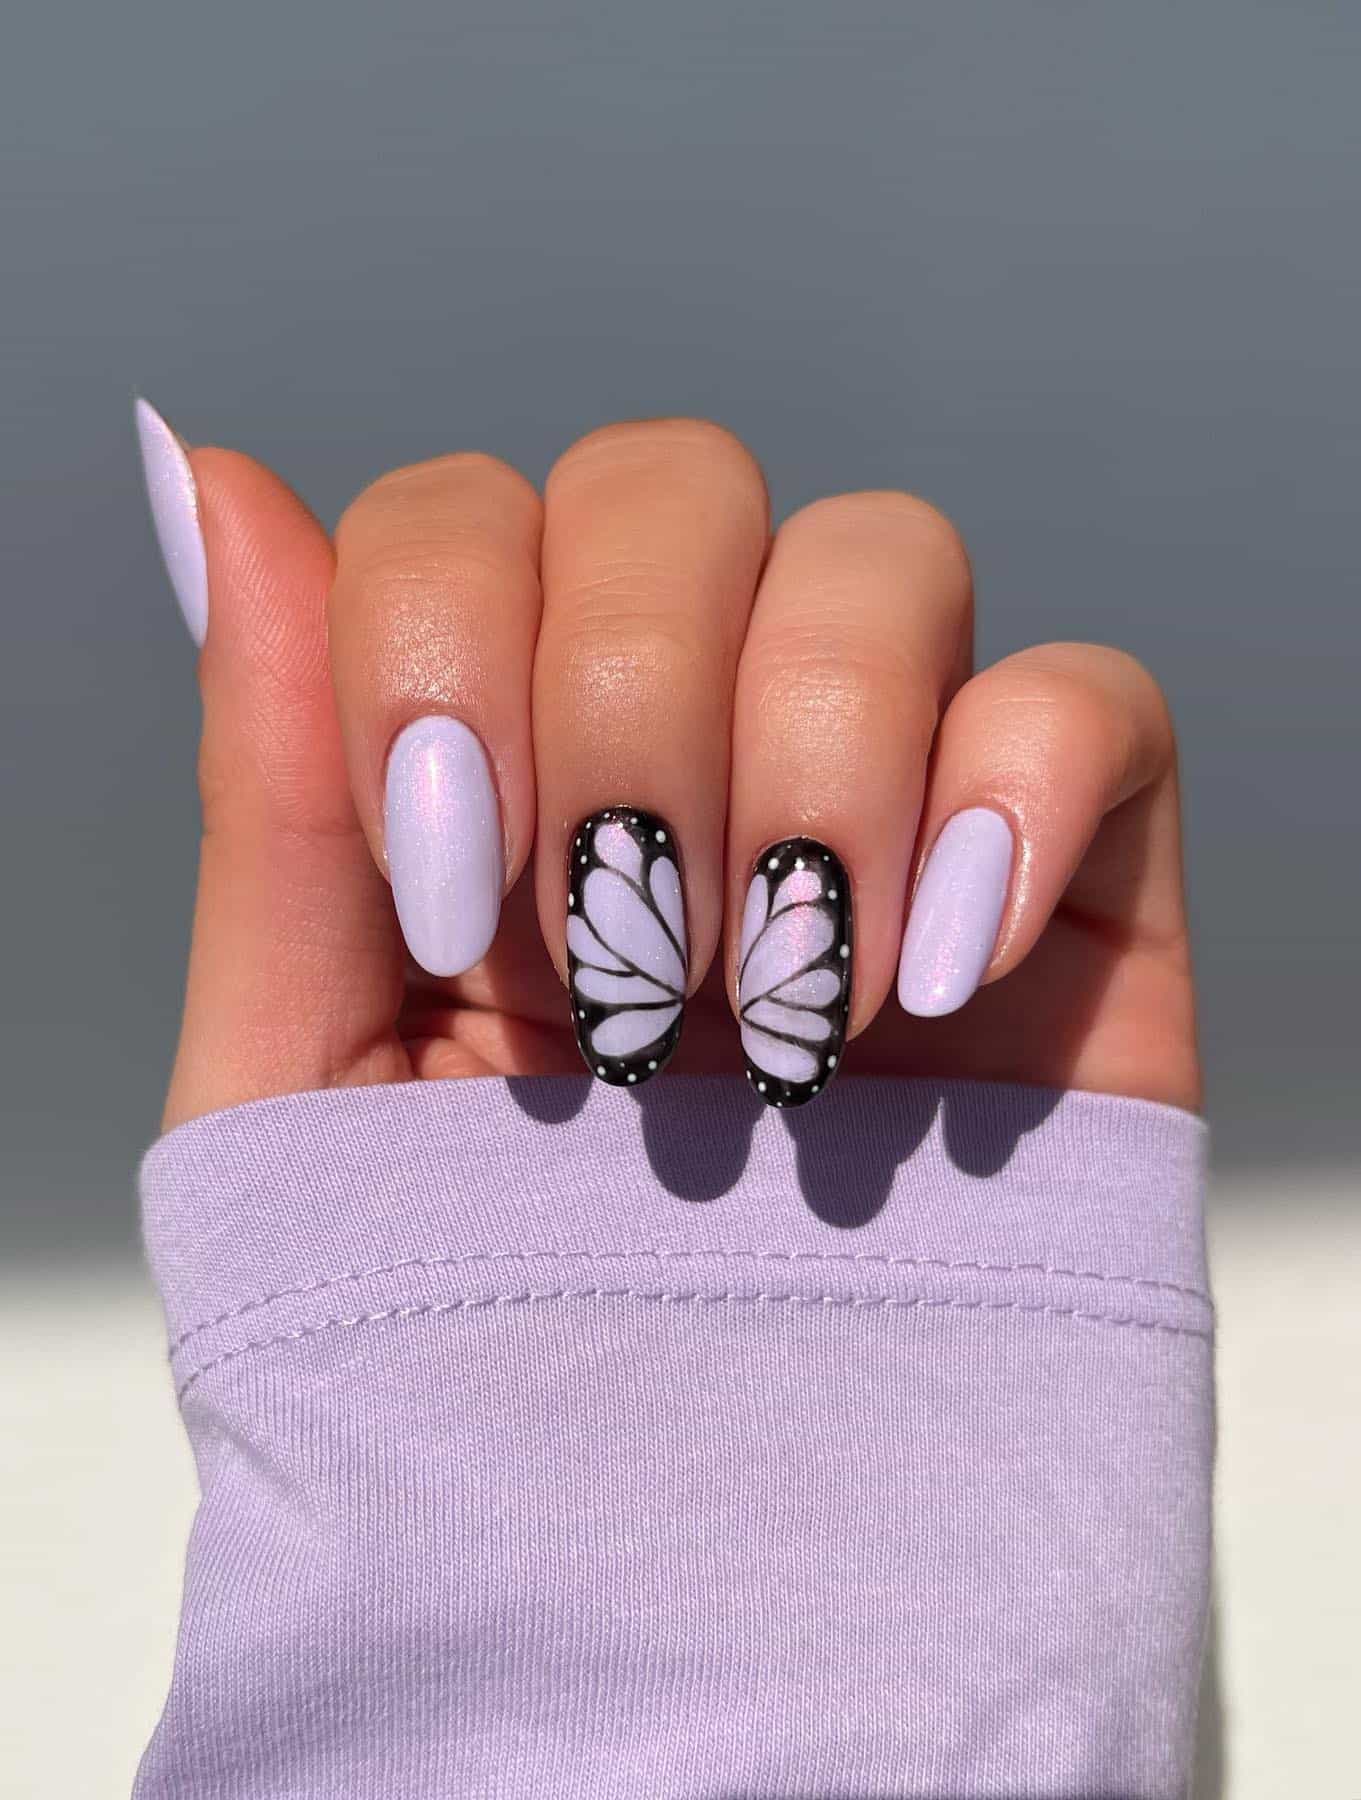 A hand with medium length almond nails painted a shimmering light purple with butterfly wing accent nails